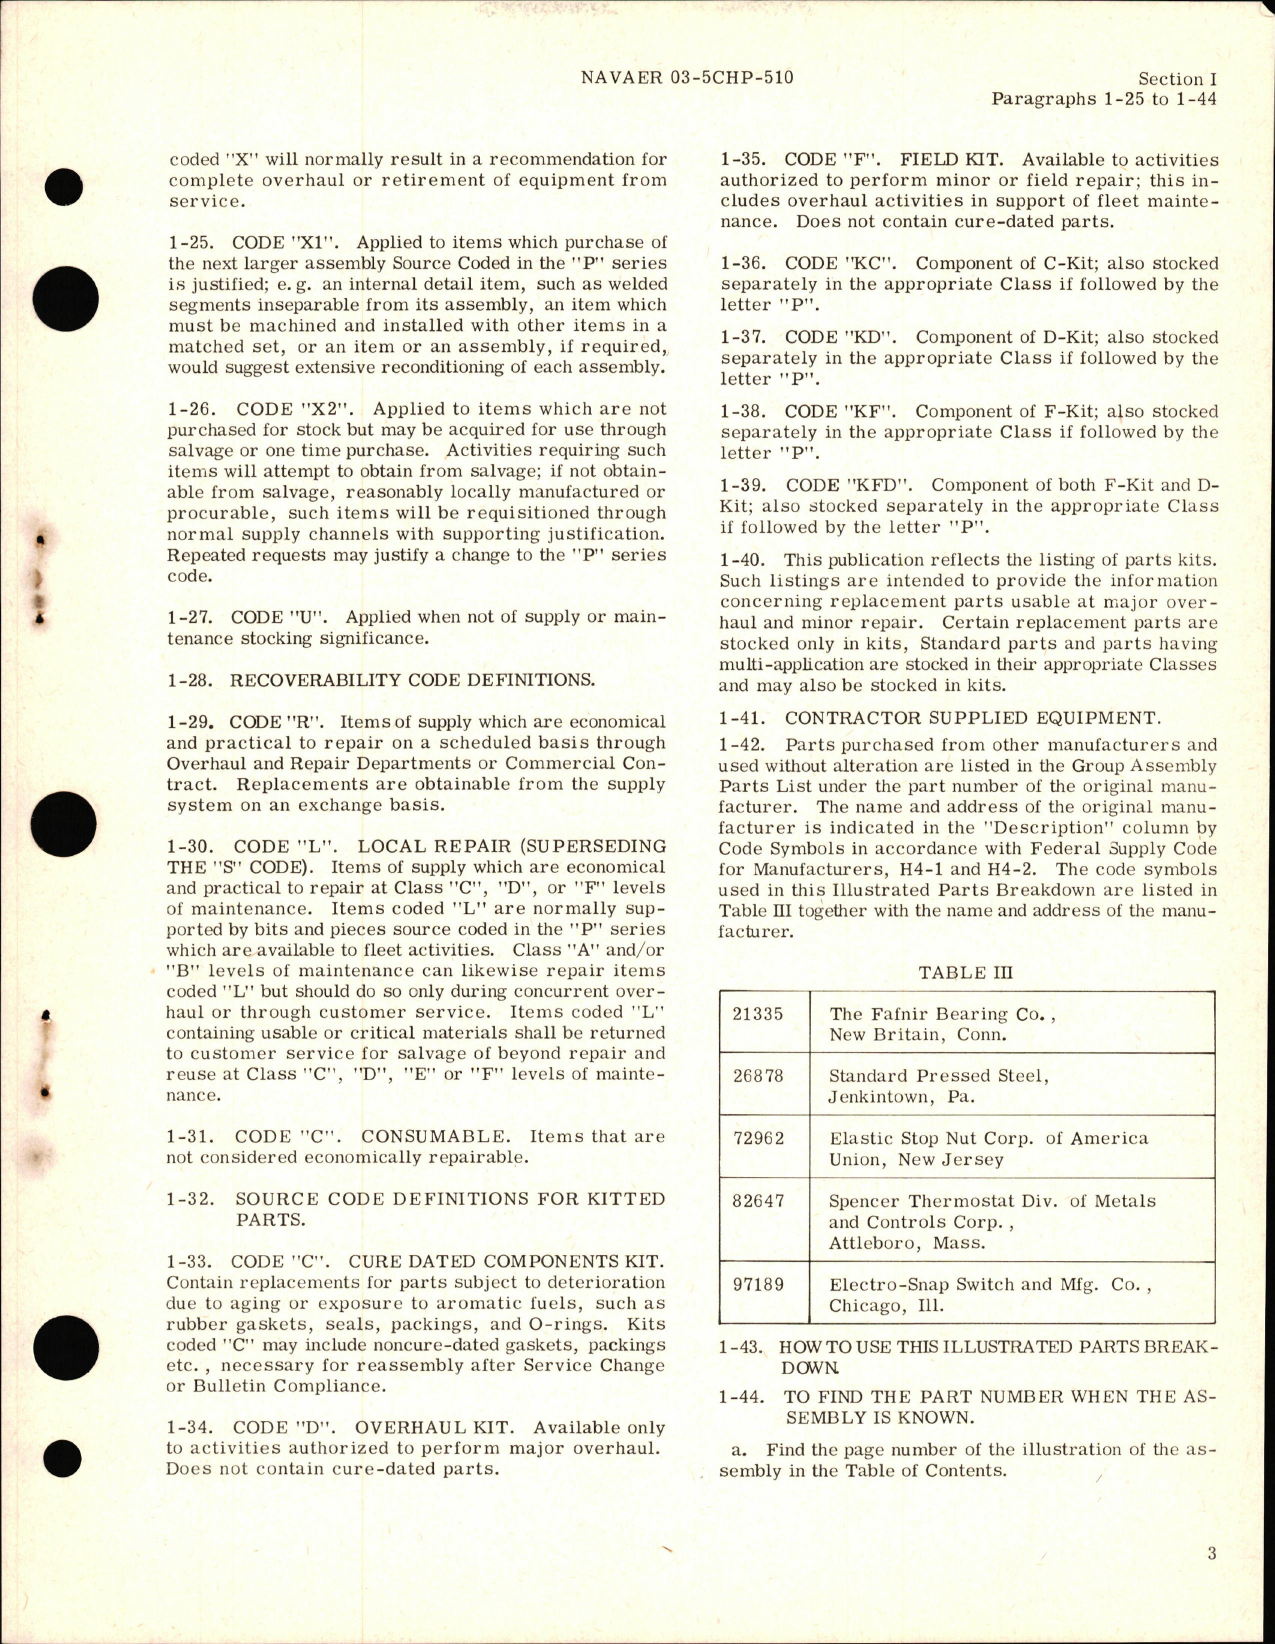 Sample page 5 from AirCorps Library document: Illustrated Parts Breakdown for Electro-Mechanical Rotary Actuator Part D1900, D1900-2, and D1900-3 